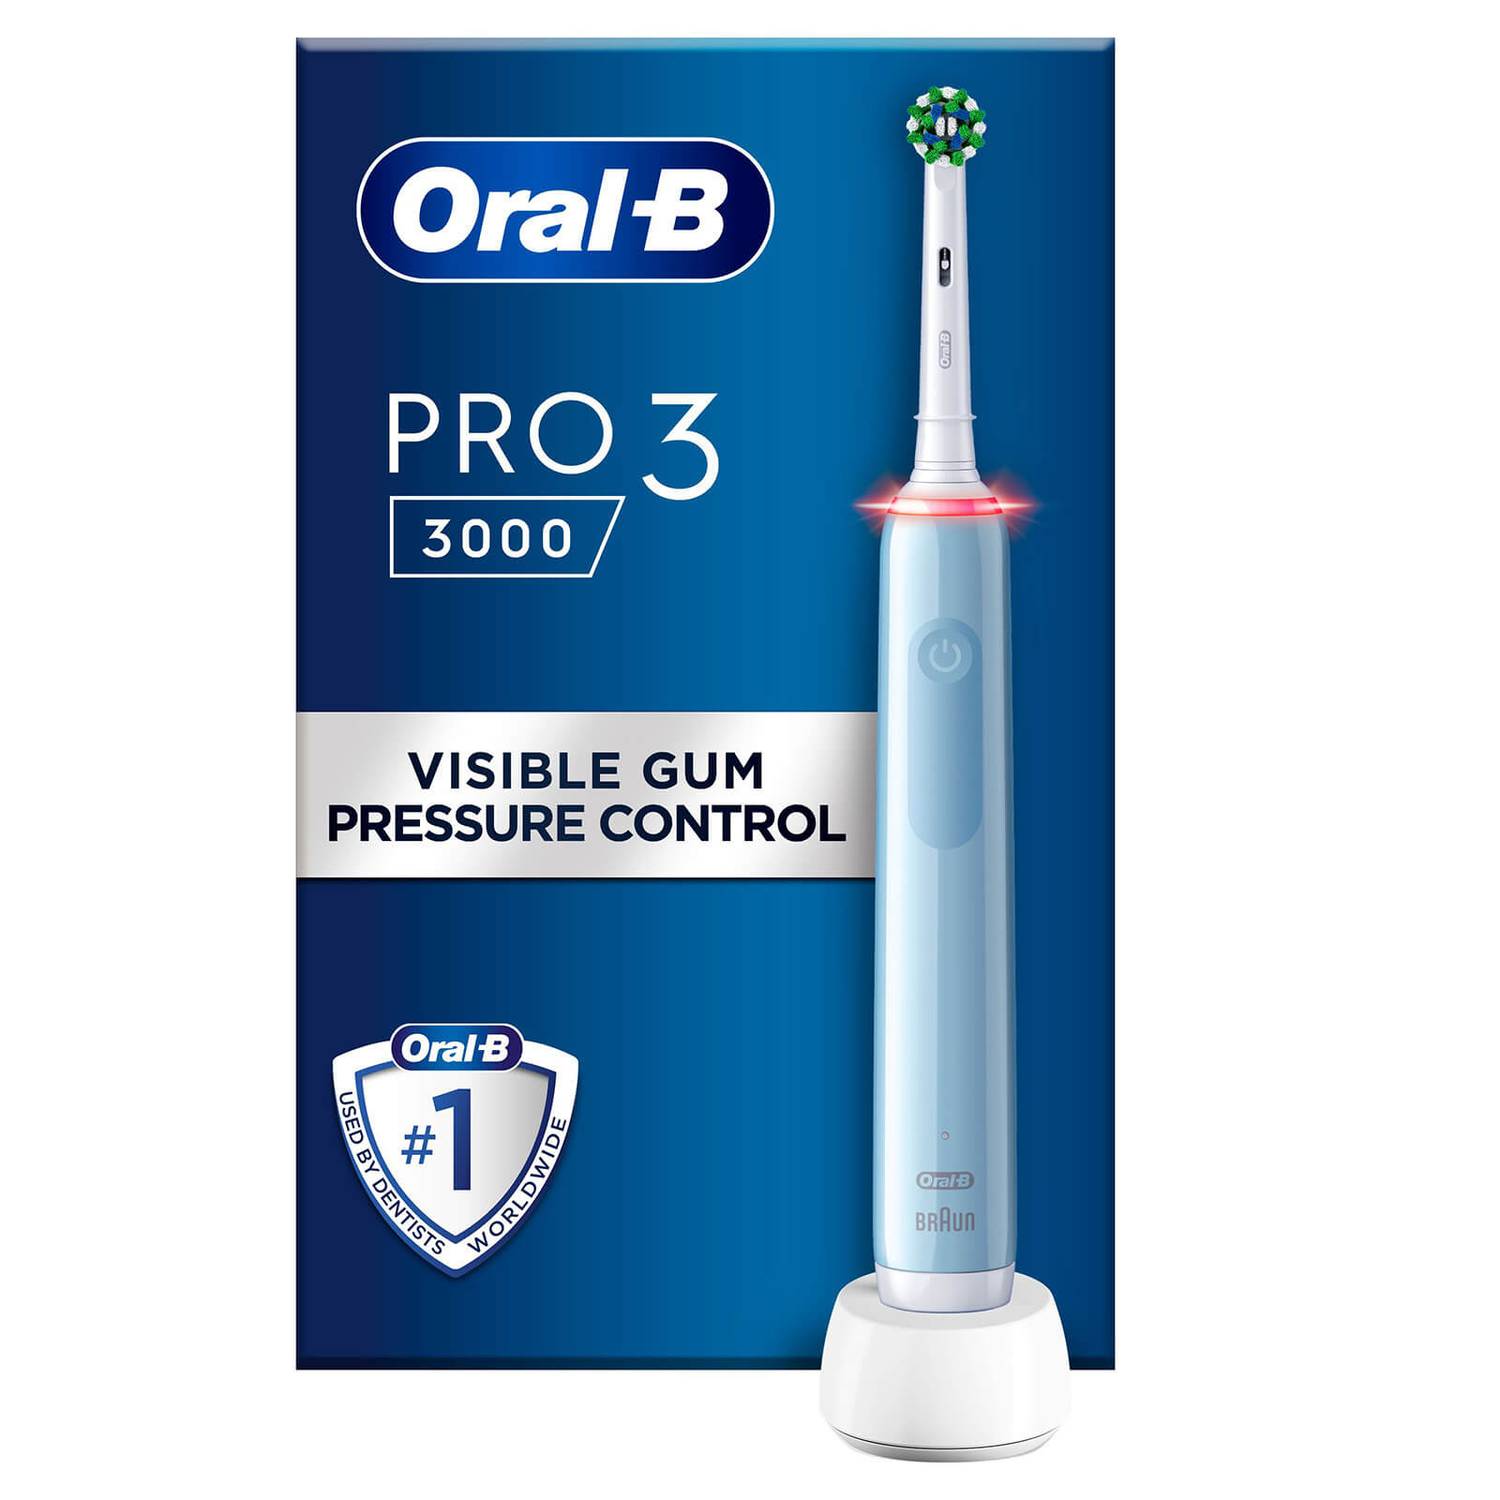 Oral B Pro 3 3000 Electric Toothbrush with Smart Pressure Sensor & 2 Brush Heads